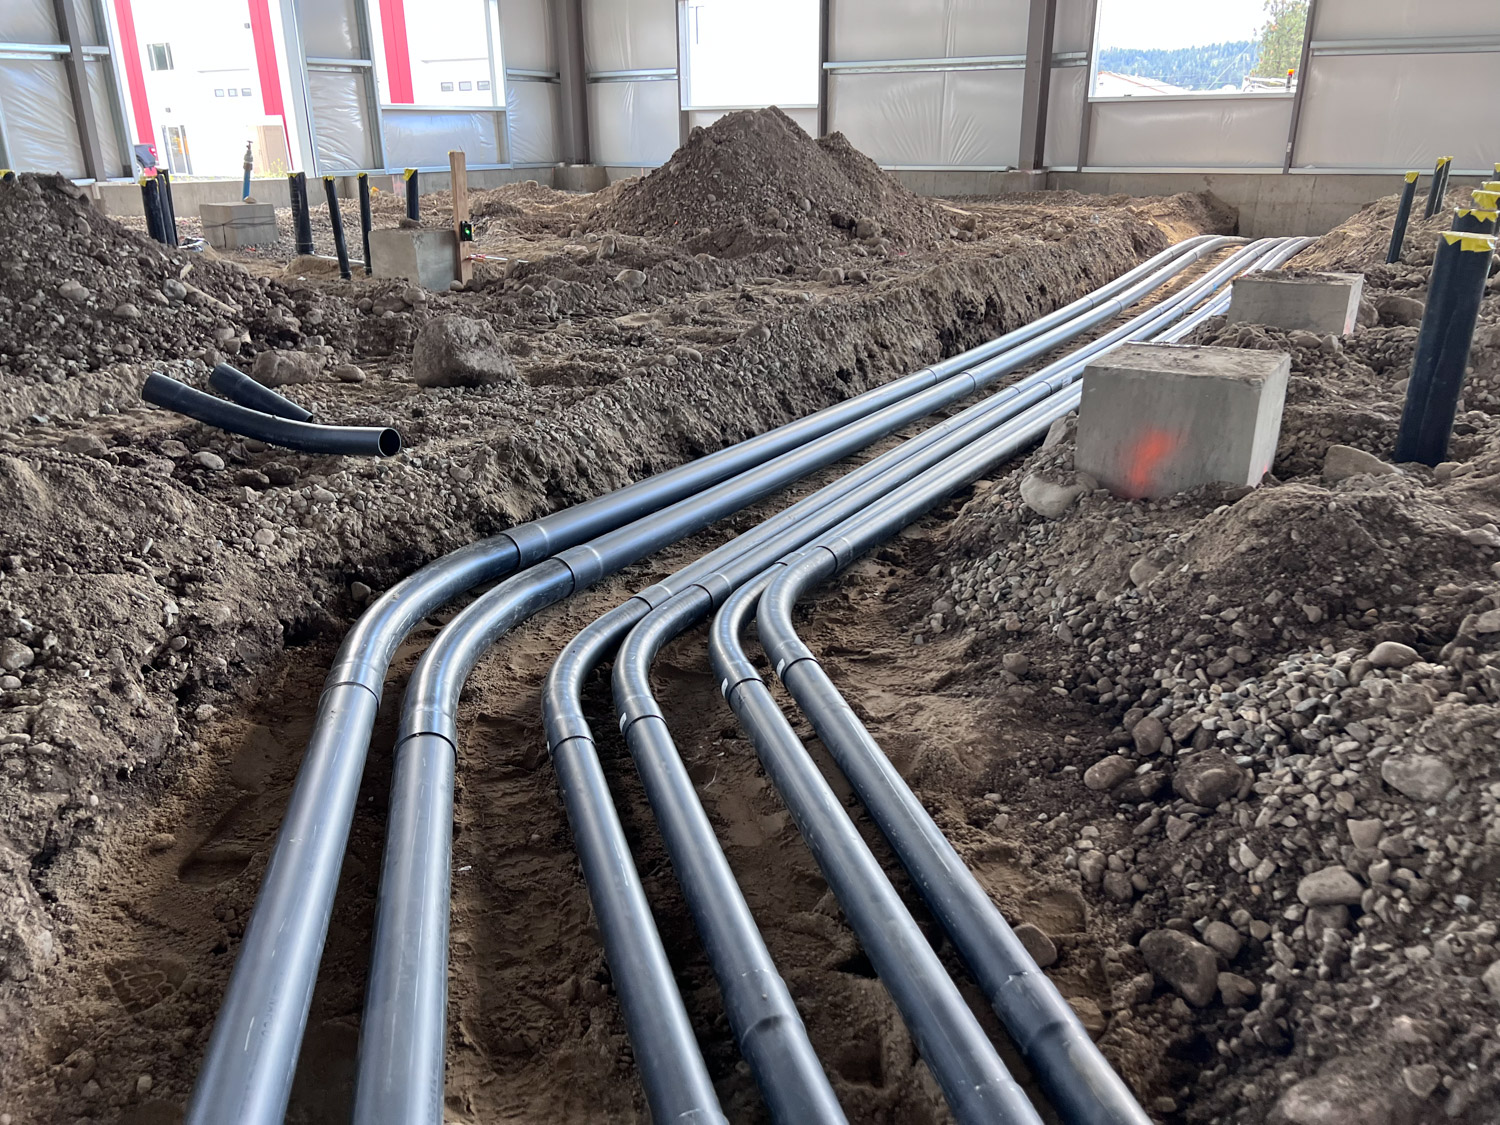 Underground electrical pipes in an Okanagan commercial business